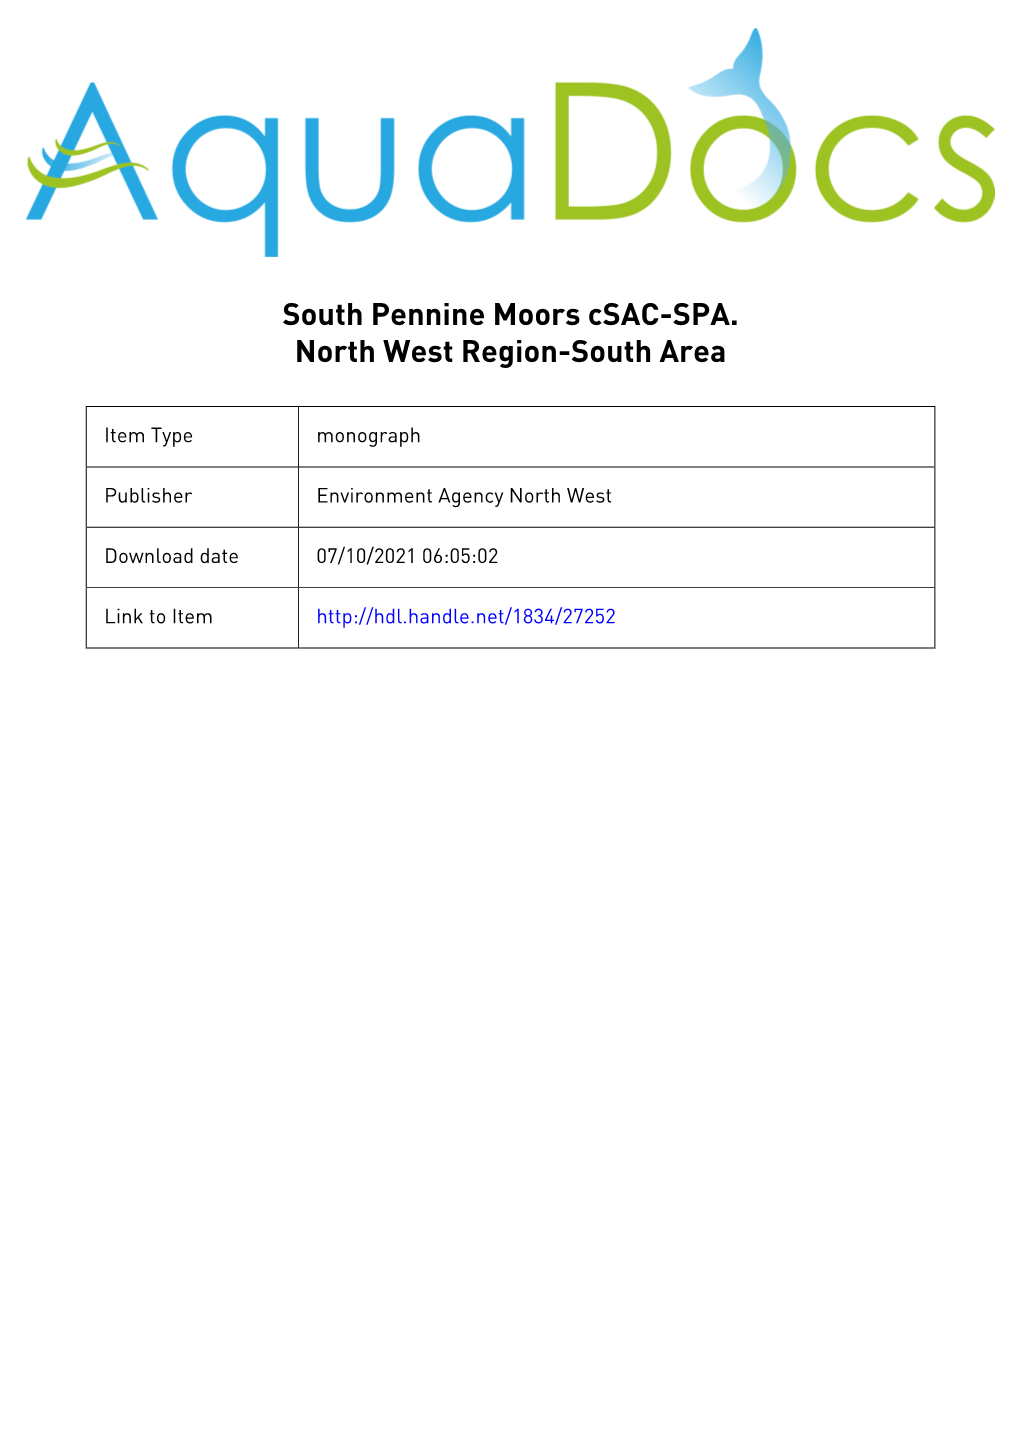 South Pennine Moors Csac / SPA North West Region-South Area Stage 1 and 2 Review of Consents